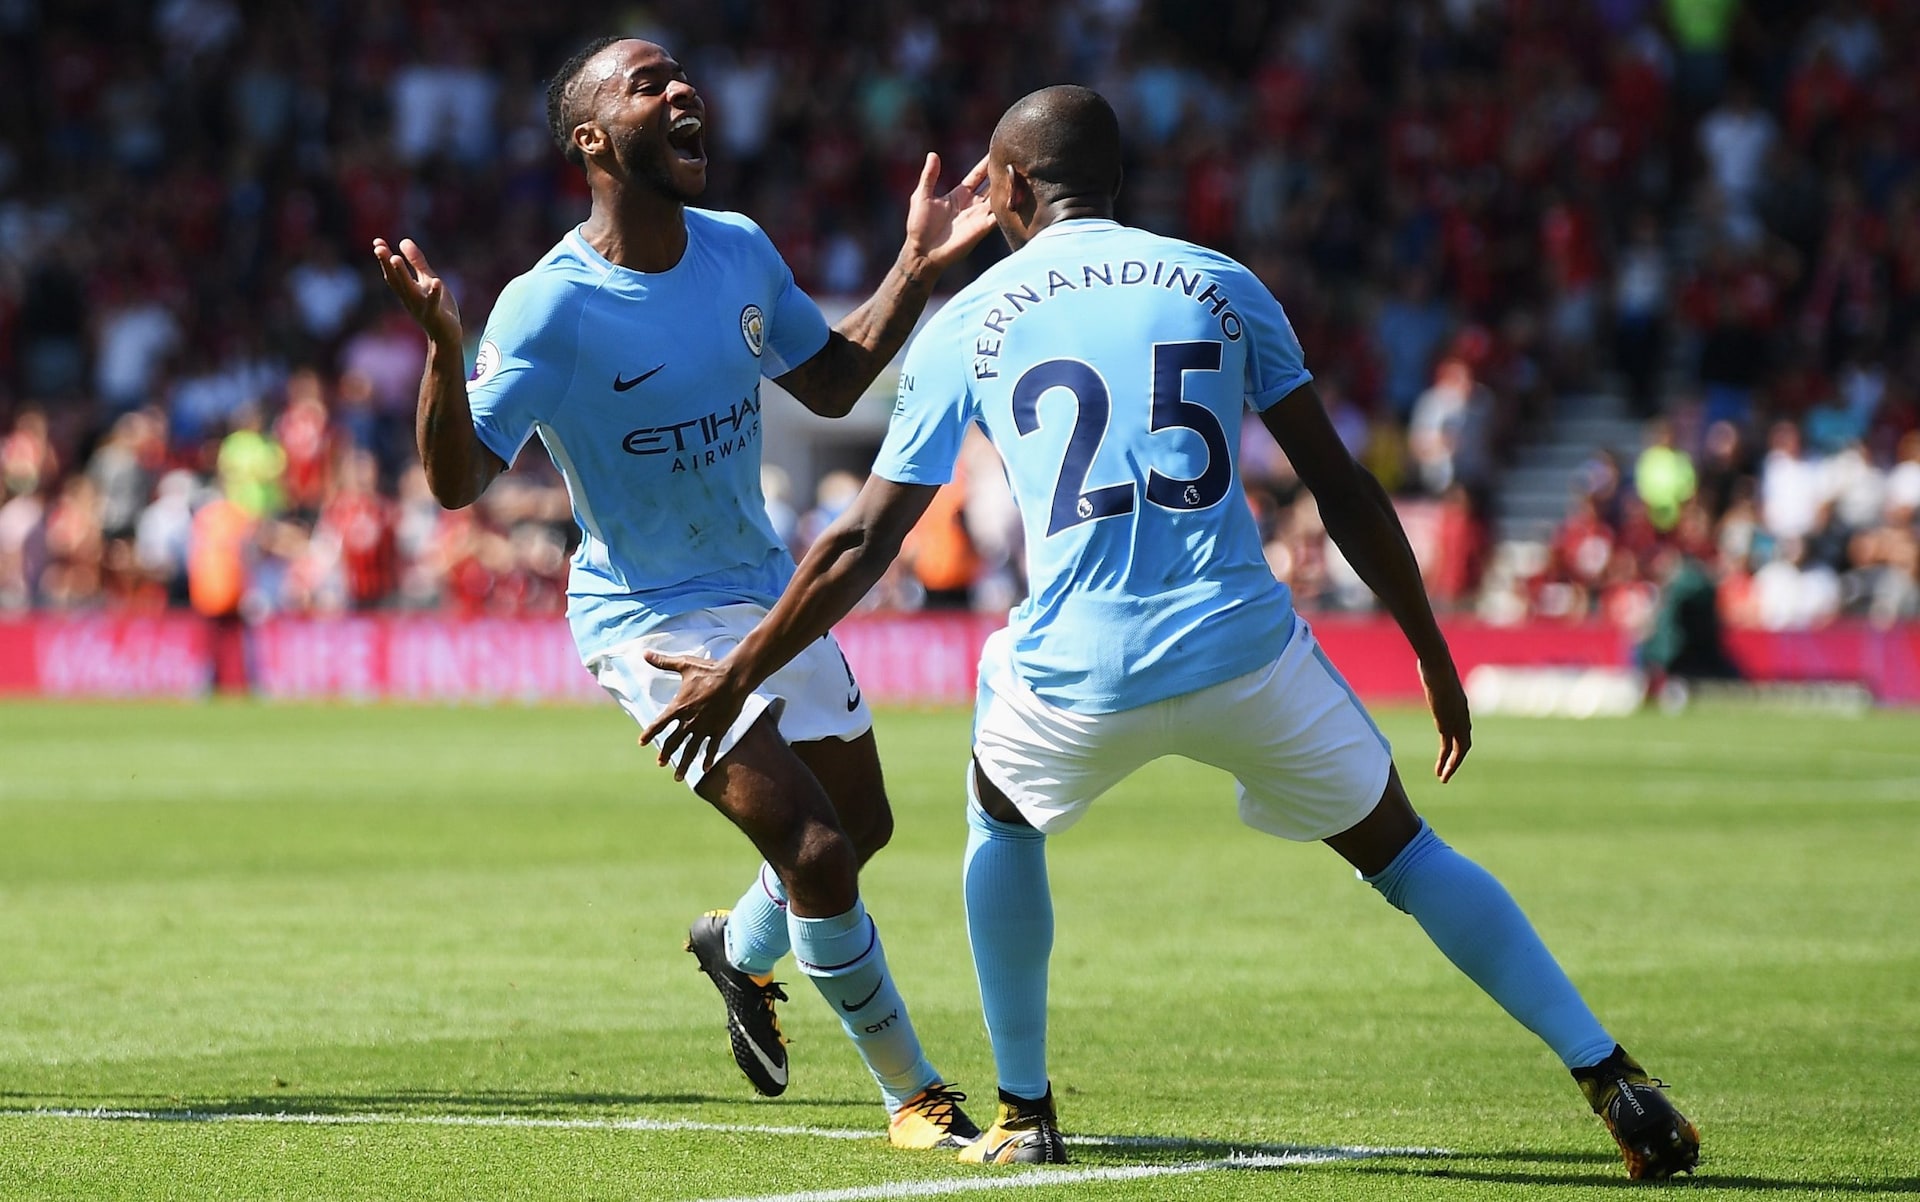 Bournemouth 1 Manchester City 2: Raheem Sterling scores deflected injury-time winner